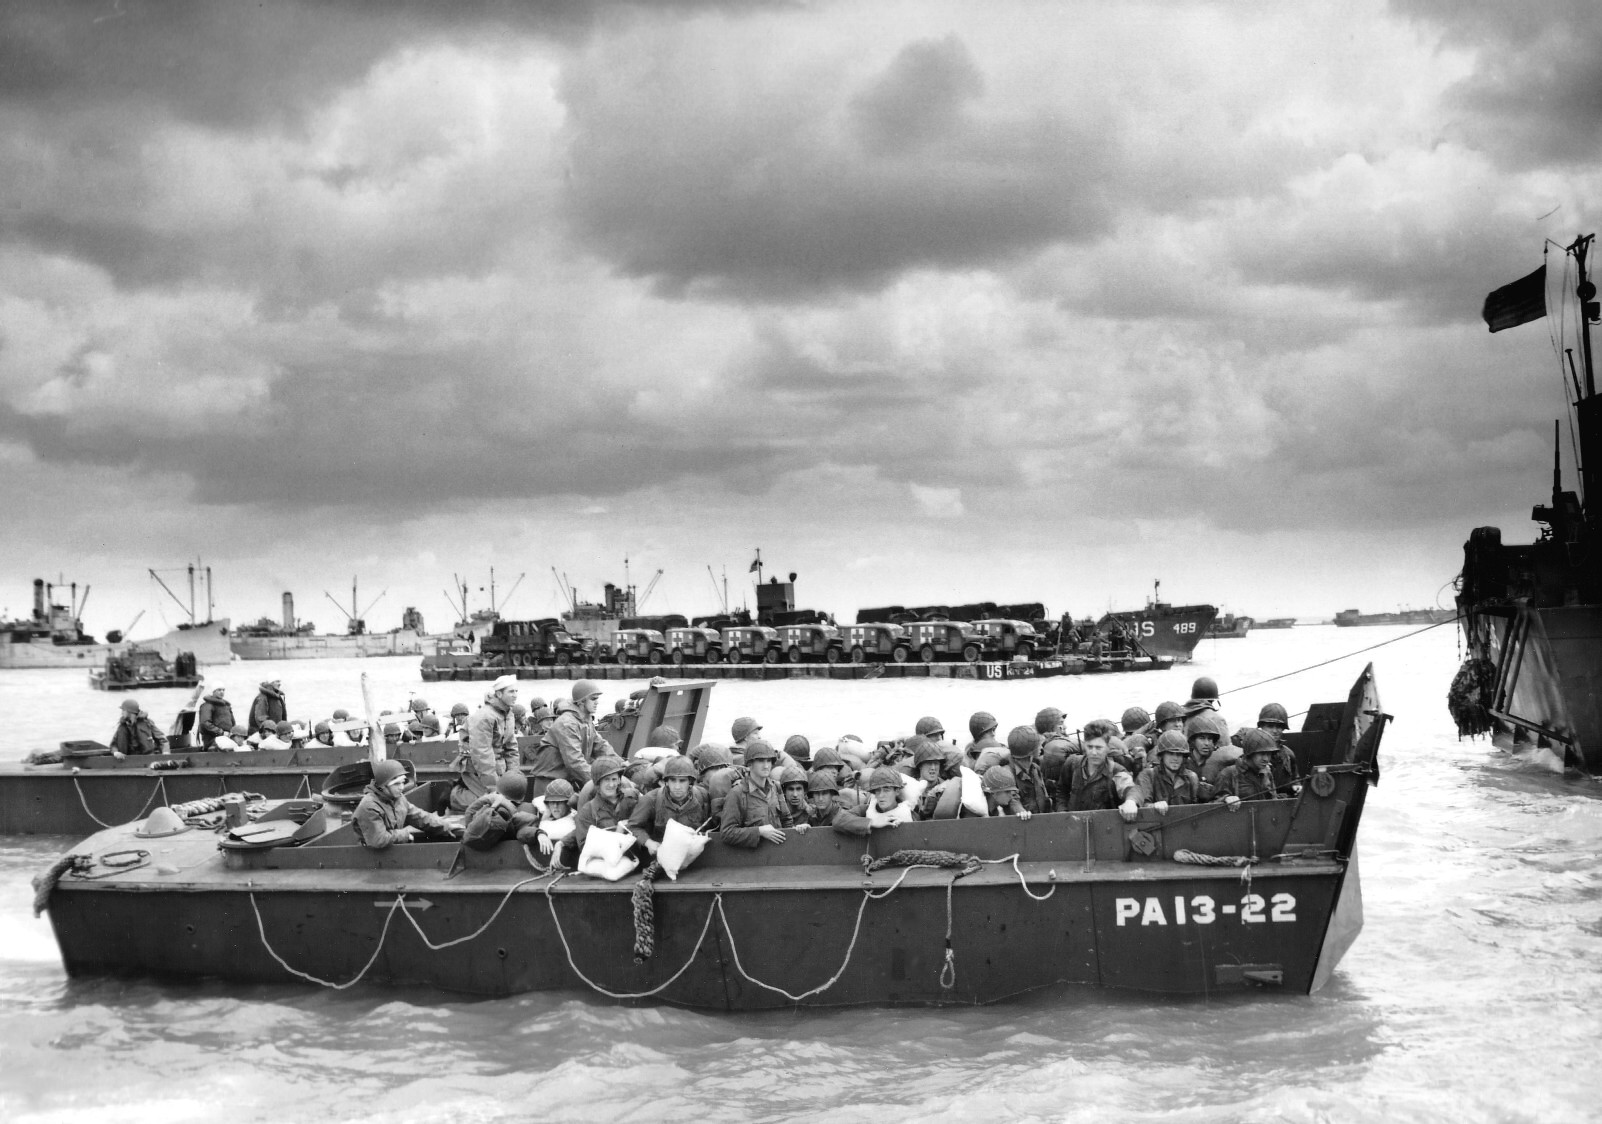 In a port in England, a loaded LCVP Landing Craft from the Attack Transport USS Joseph T. Dickman brought troops to the ship for the crossing to Normandy, June 1944. Note Rhino barge loaded with WC54 Ambulances